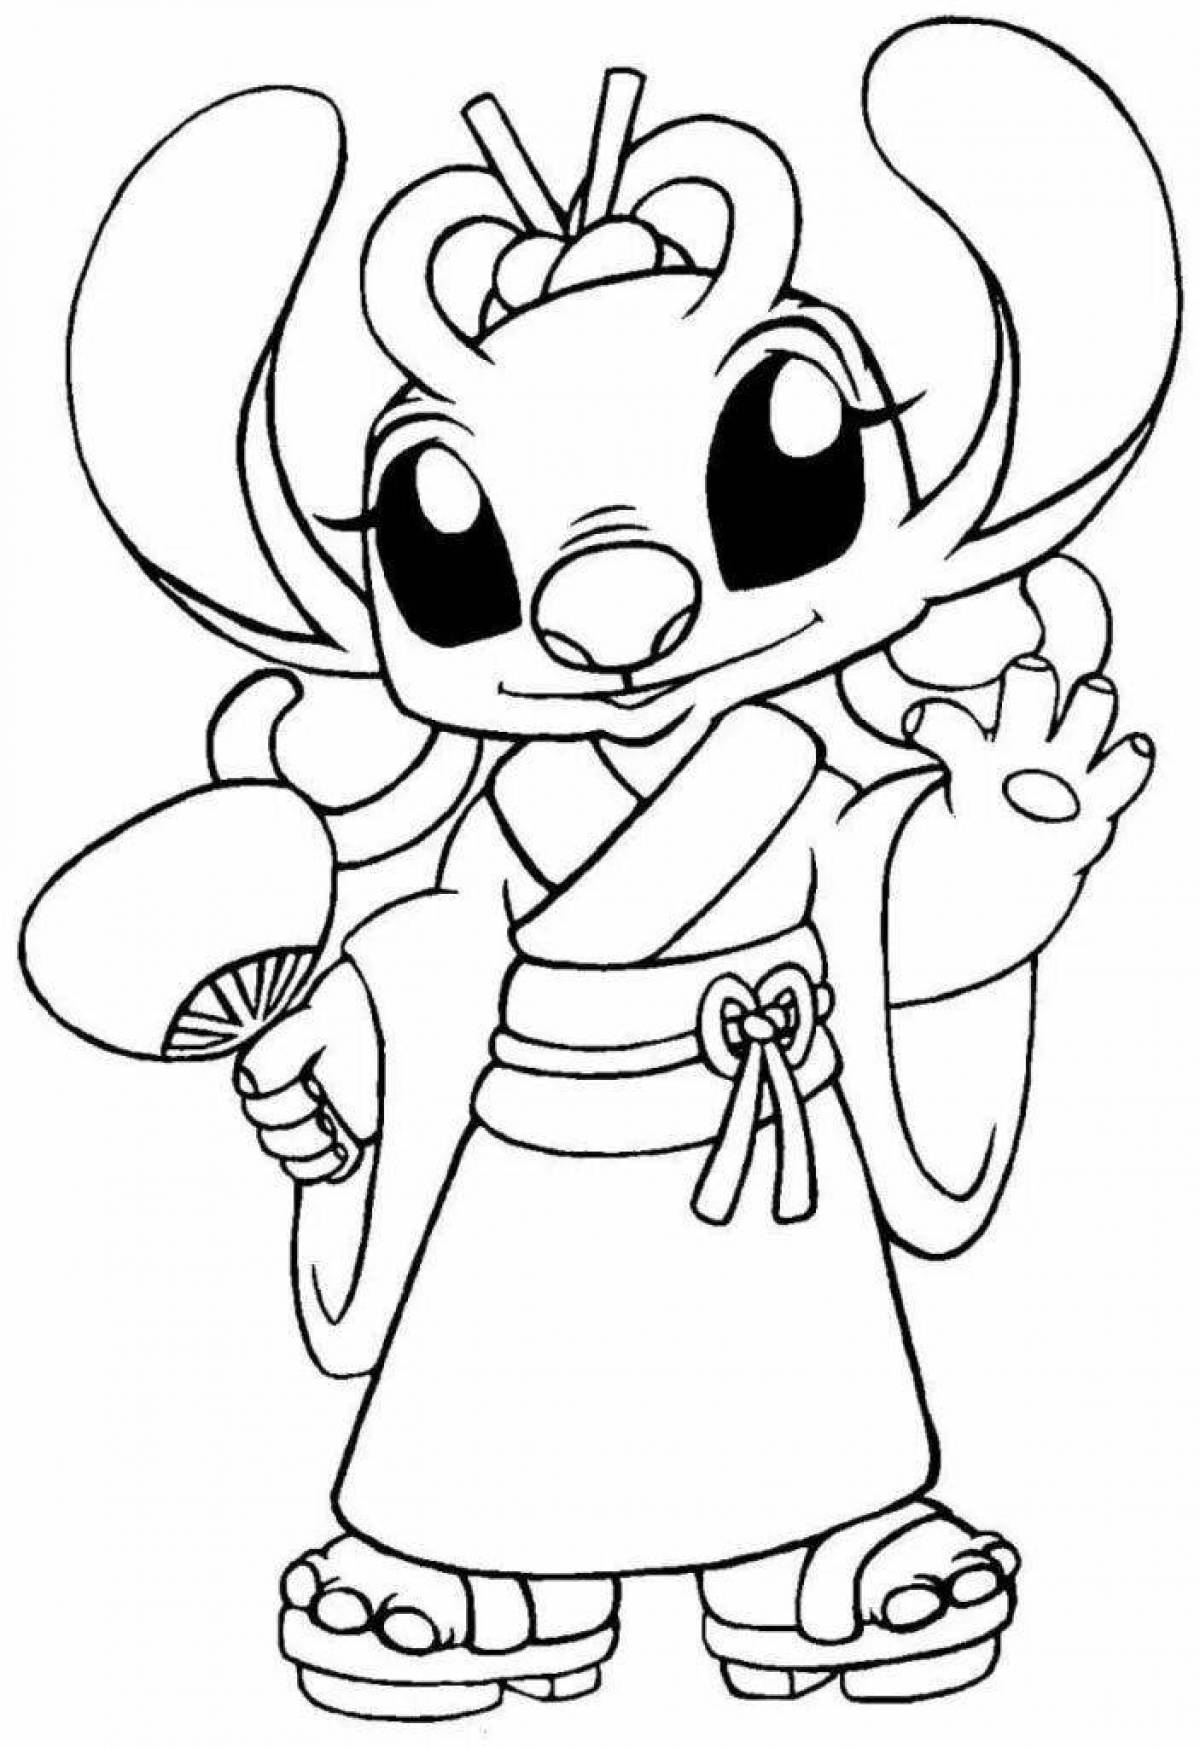 Charm stitch and angel coloring page